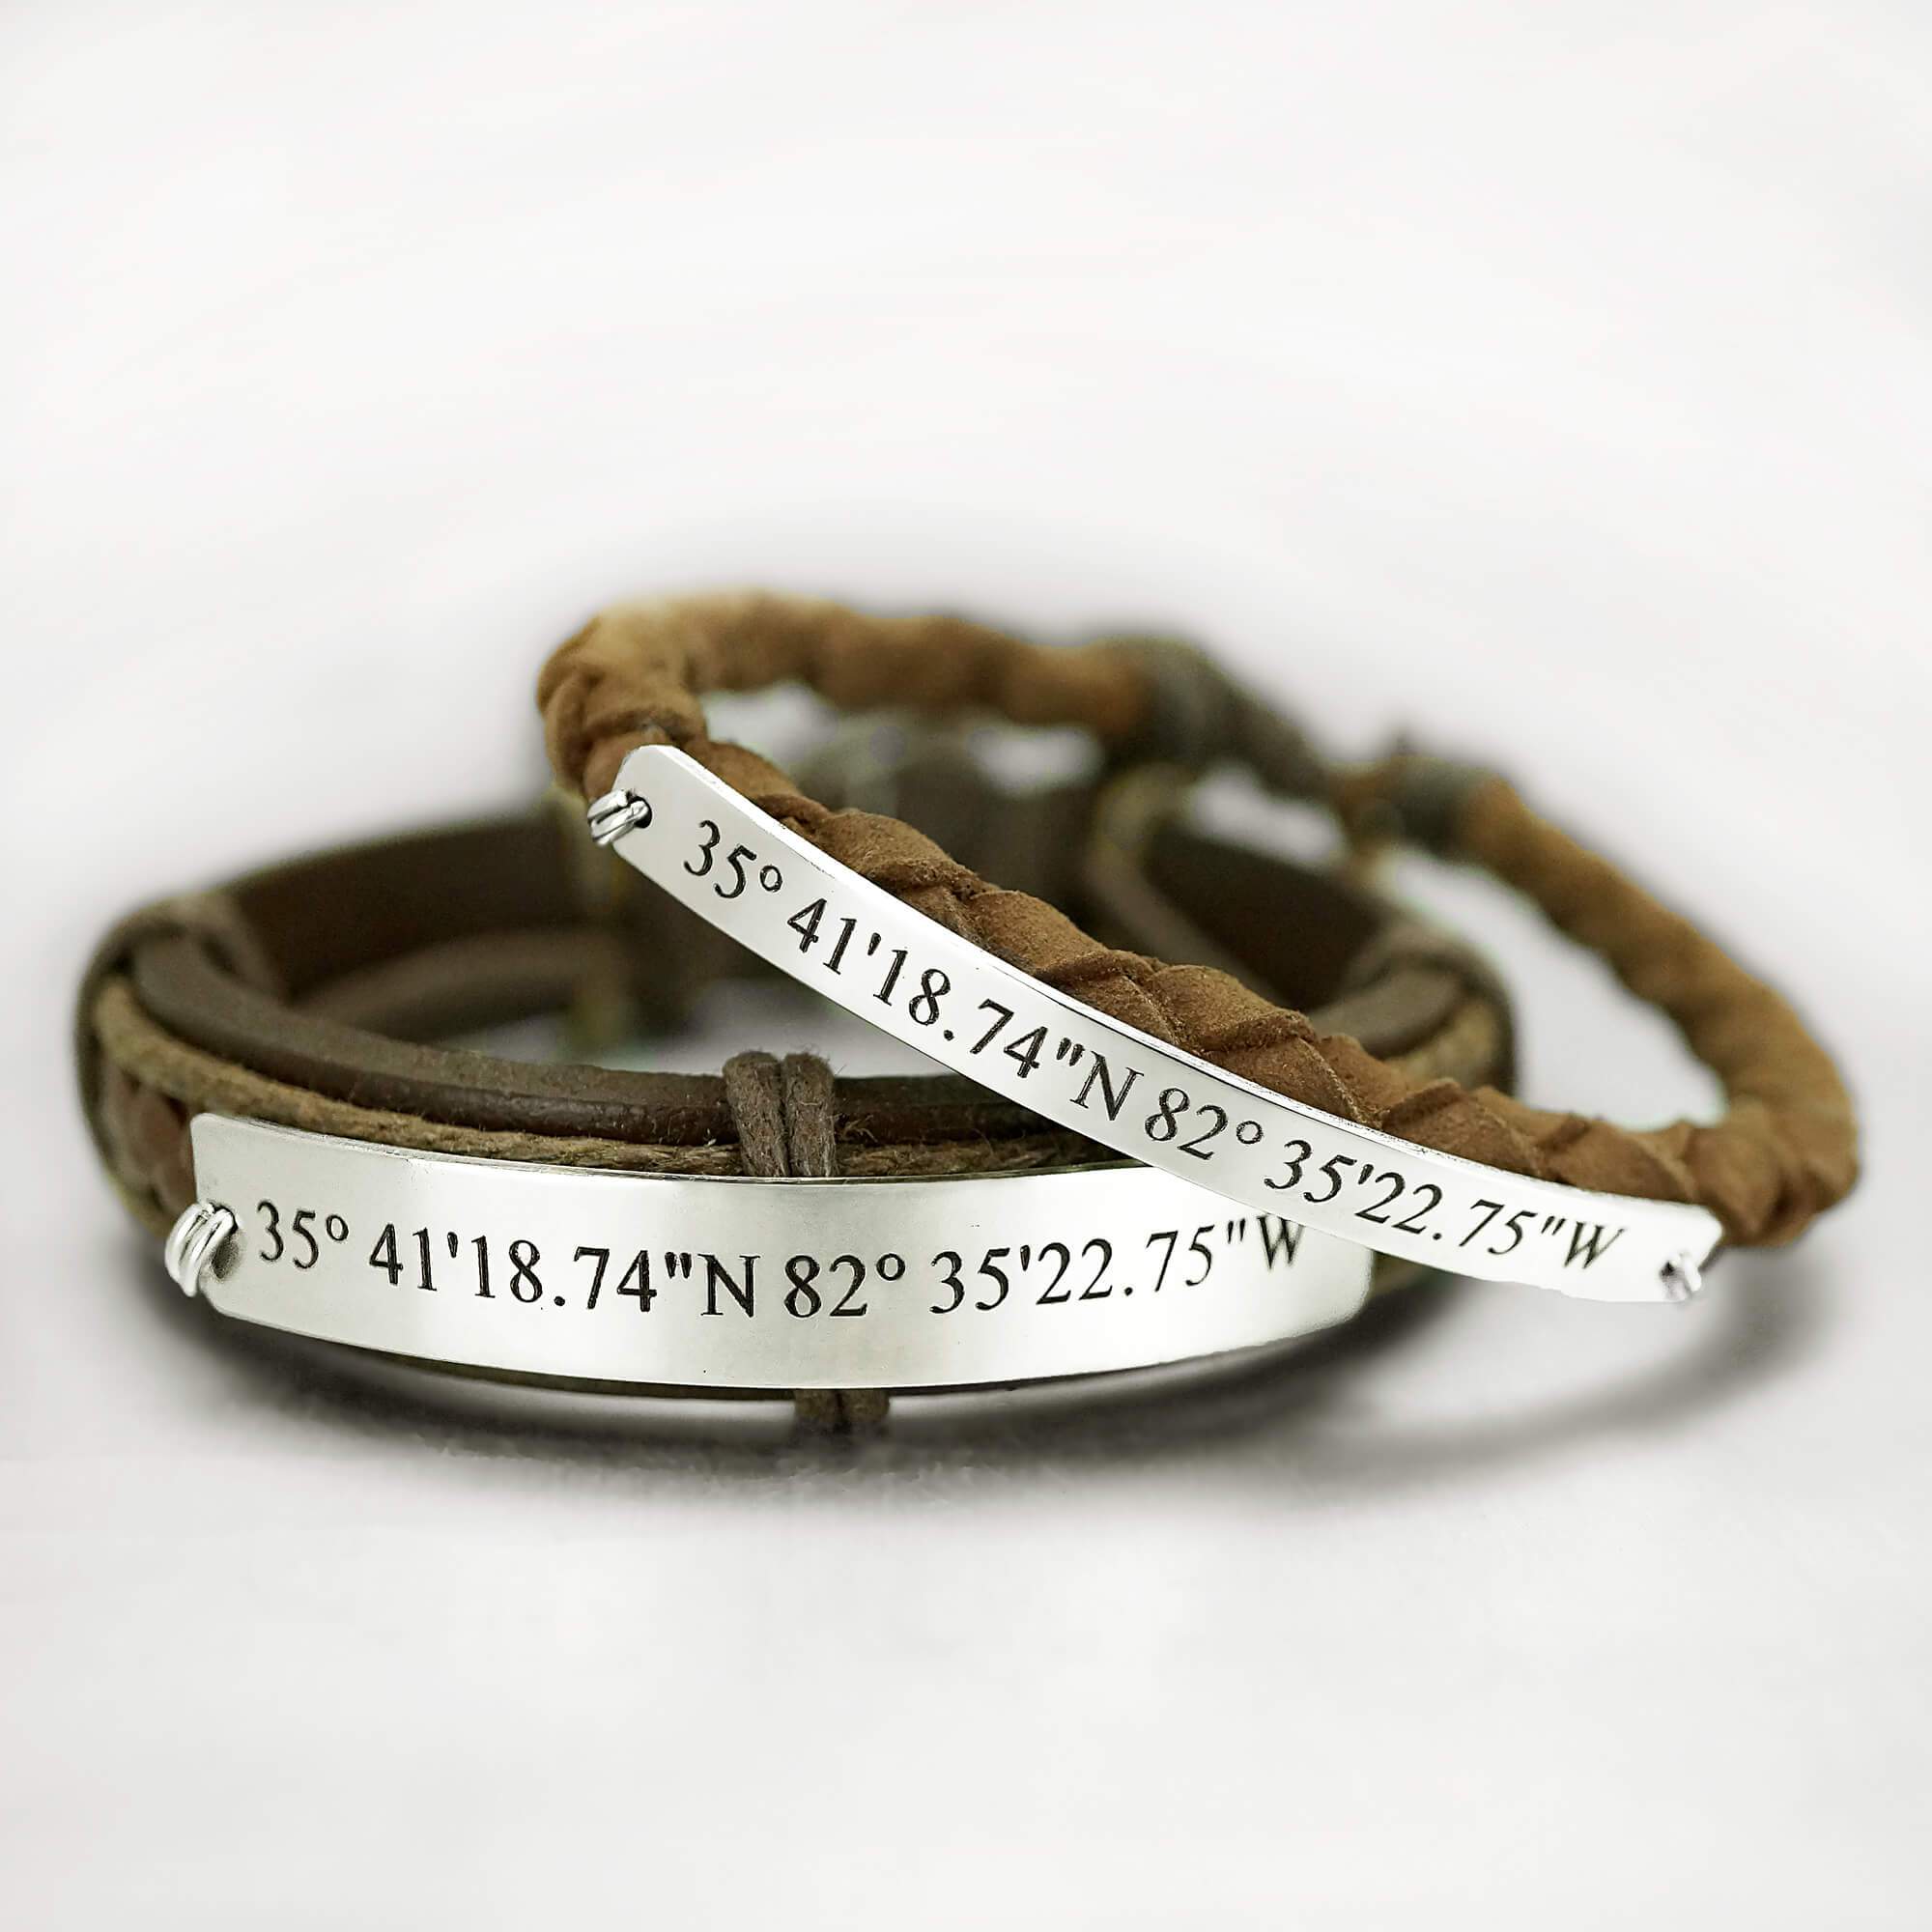 Distance Bracelets For Couples | Popular Couple Bracelets With Meaning |  Classy Women Collection